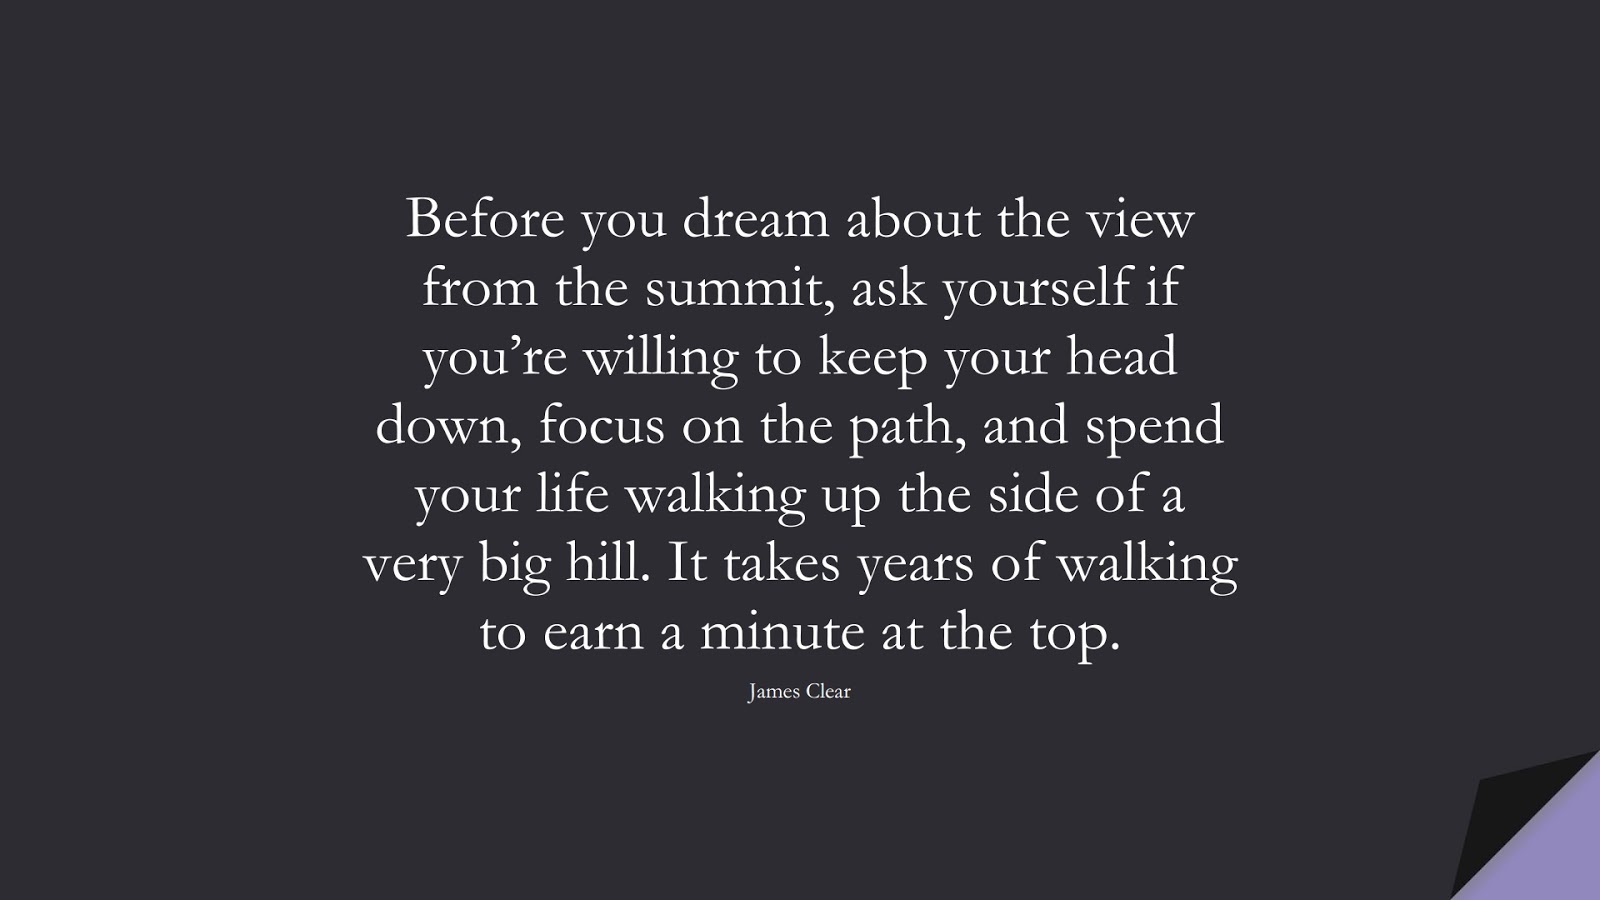 Before you dream about the view from the summit, ask yourself if you’re willing to keep your head down, focus on the path, and spend your life walking up the side of a very big hill. It takes years of walking to earn a minute at the top. (James Clear);  #PerseveranceQuotes